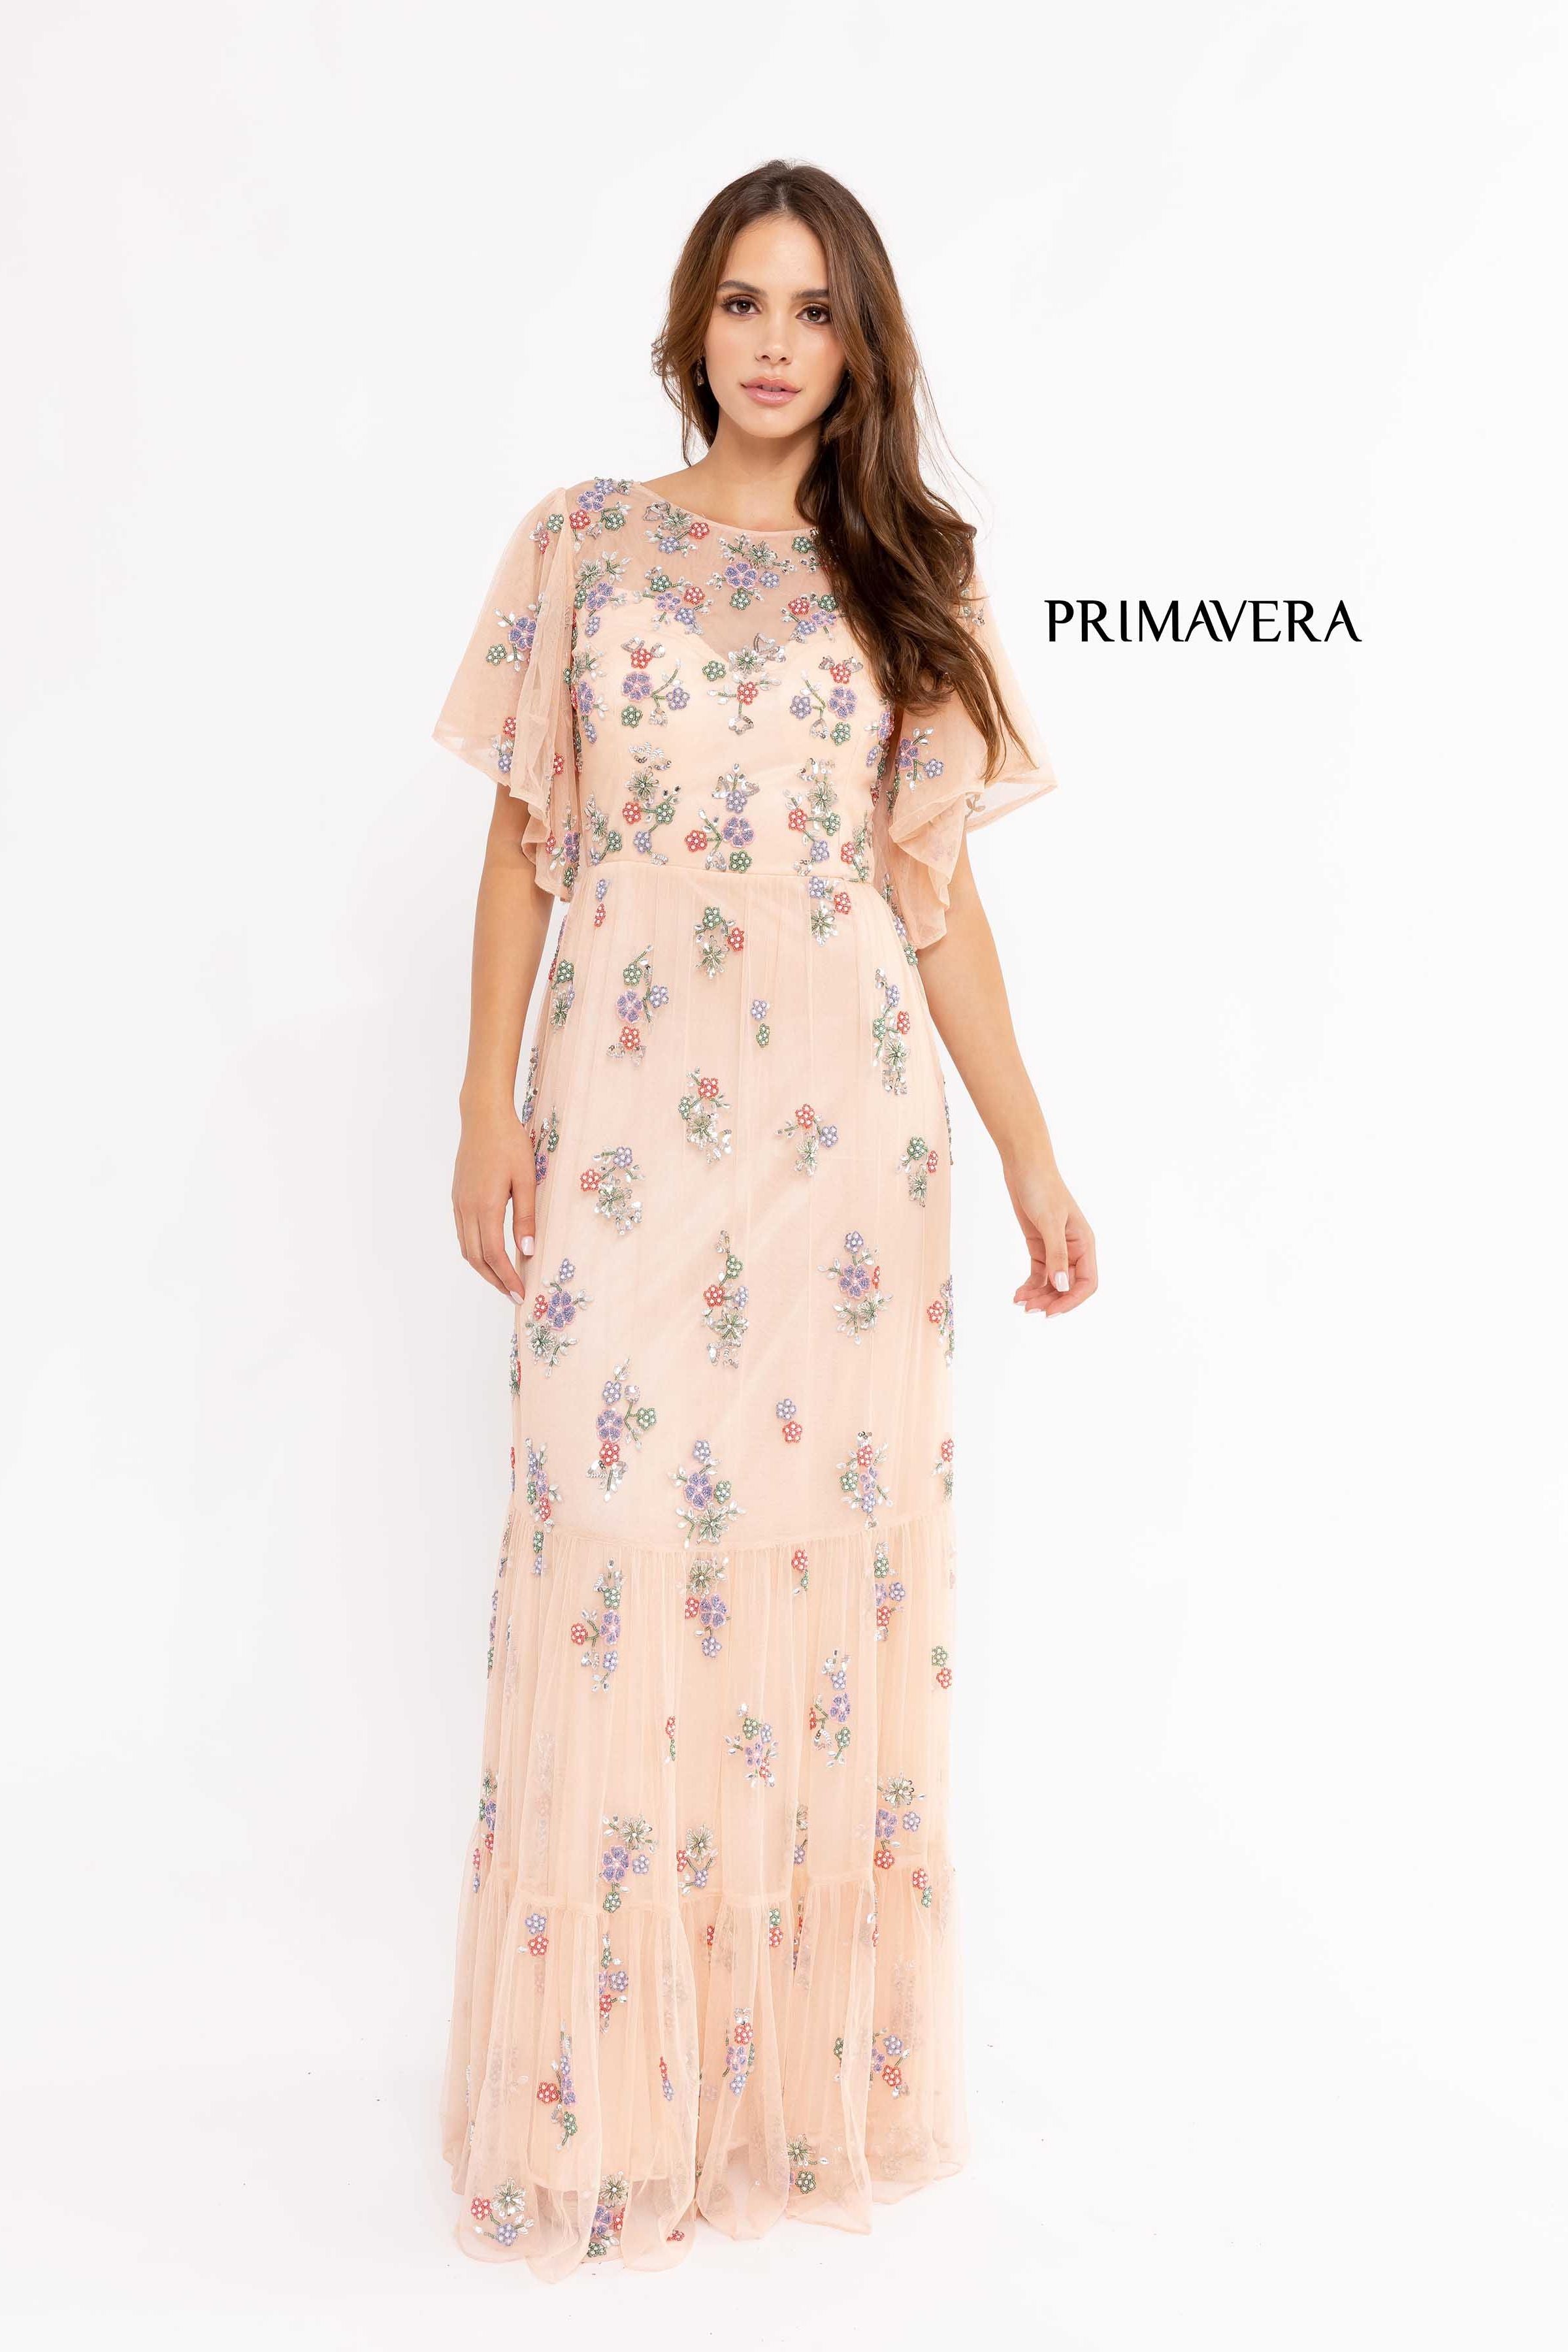 Soft-Looking Floral Long Dress By Primavera Couture -13108